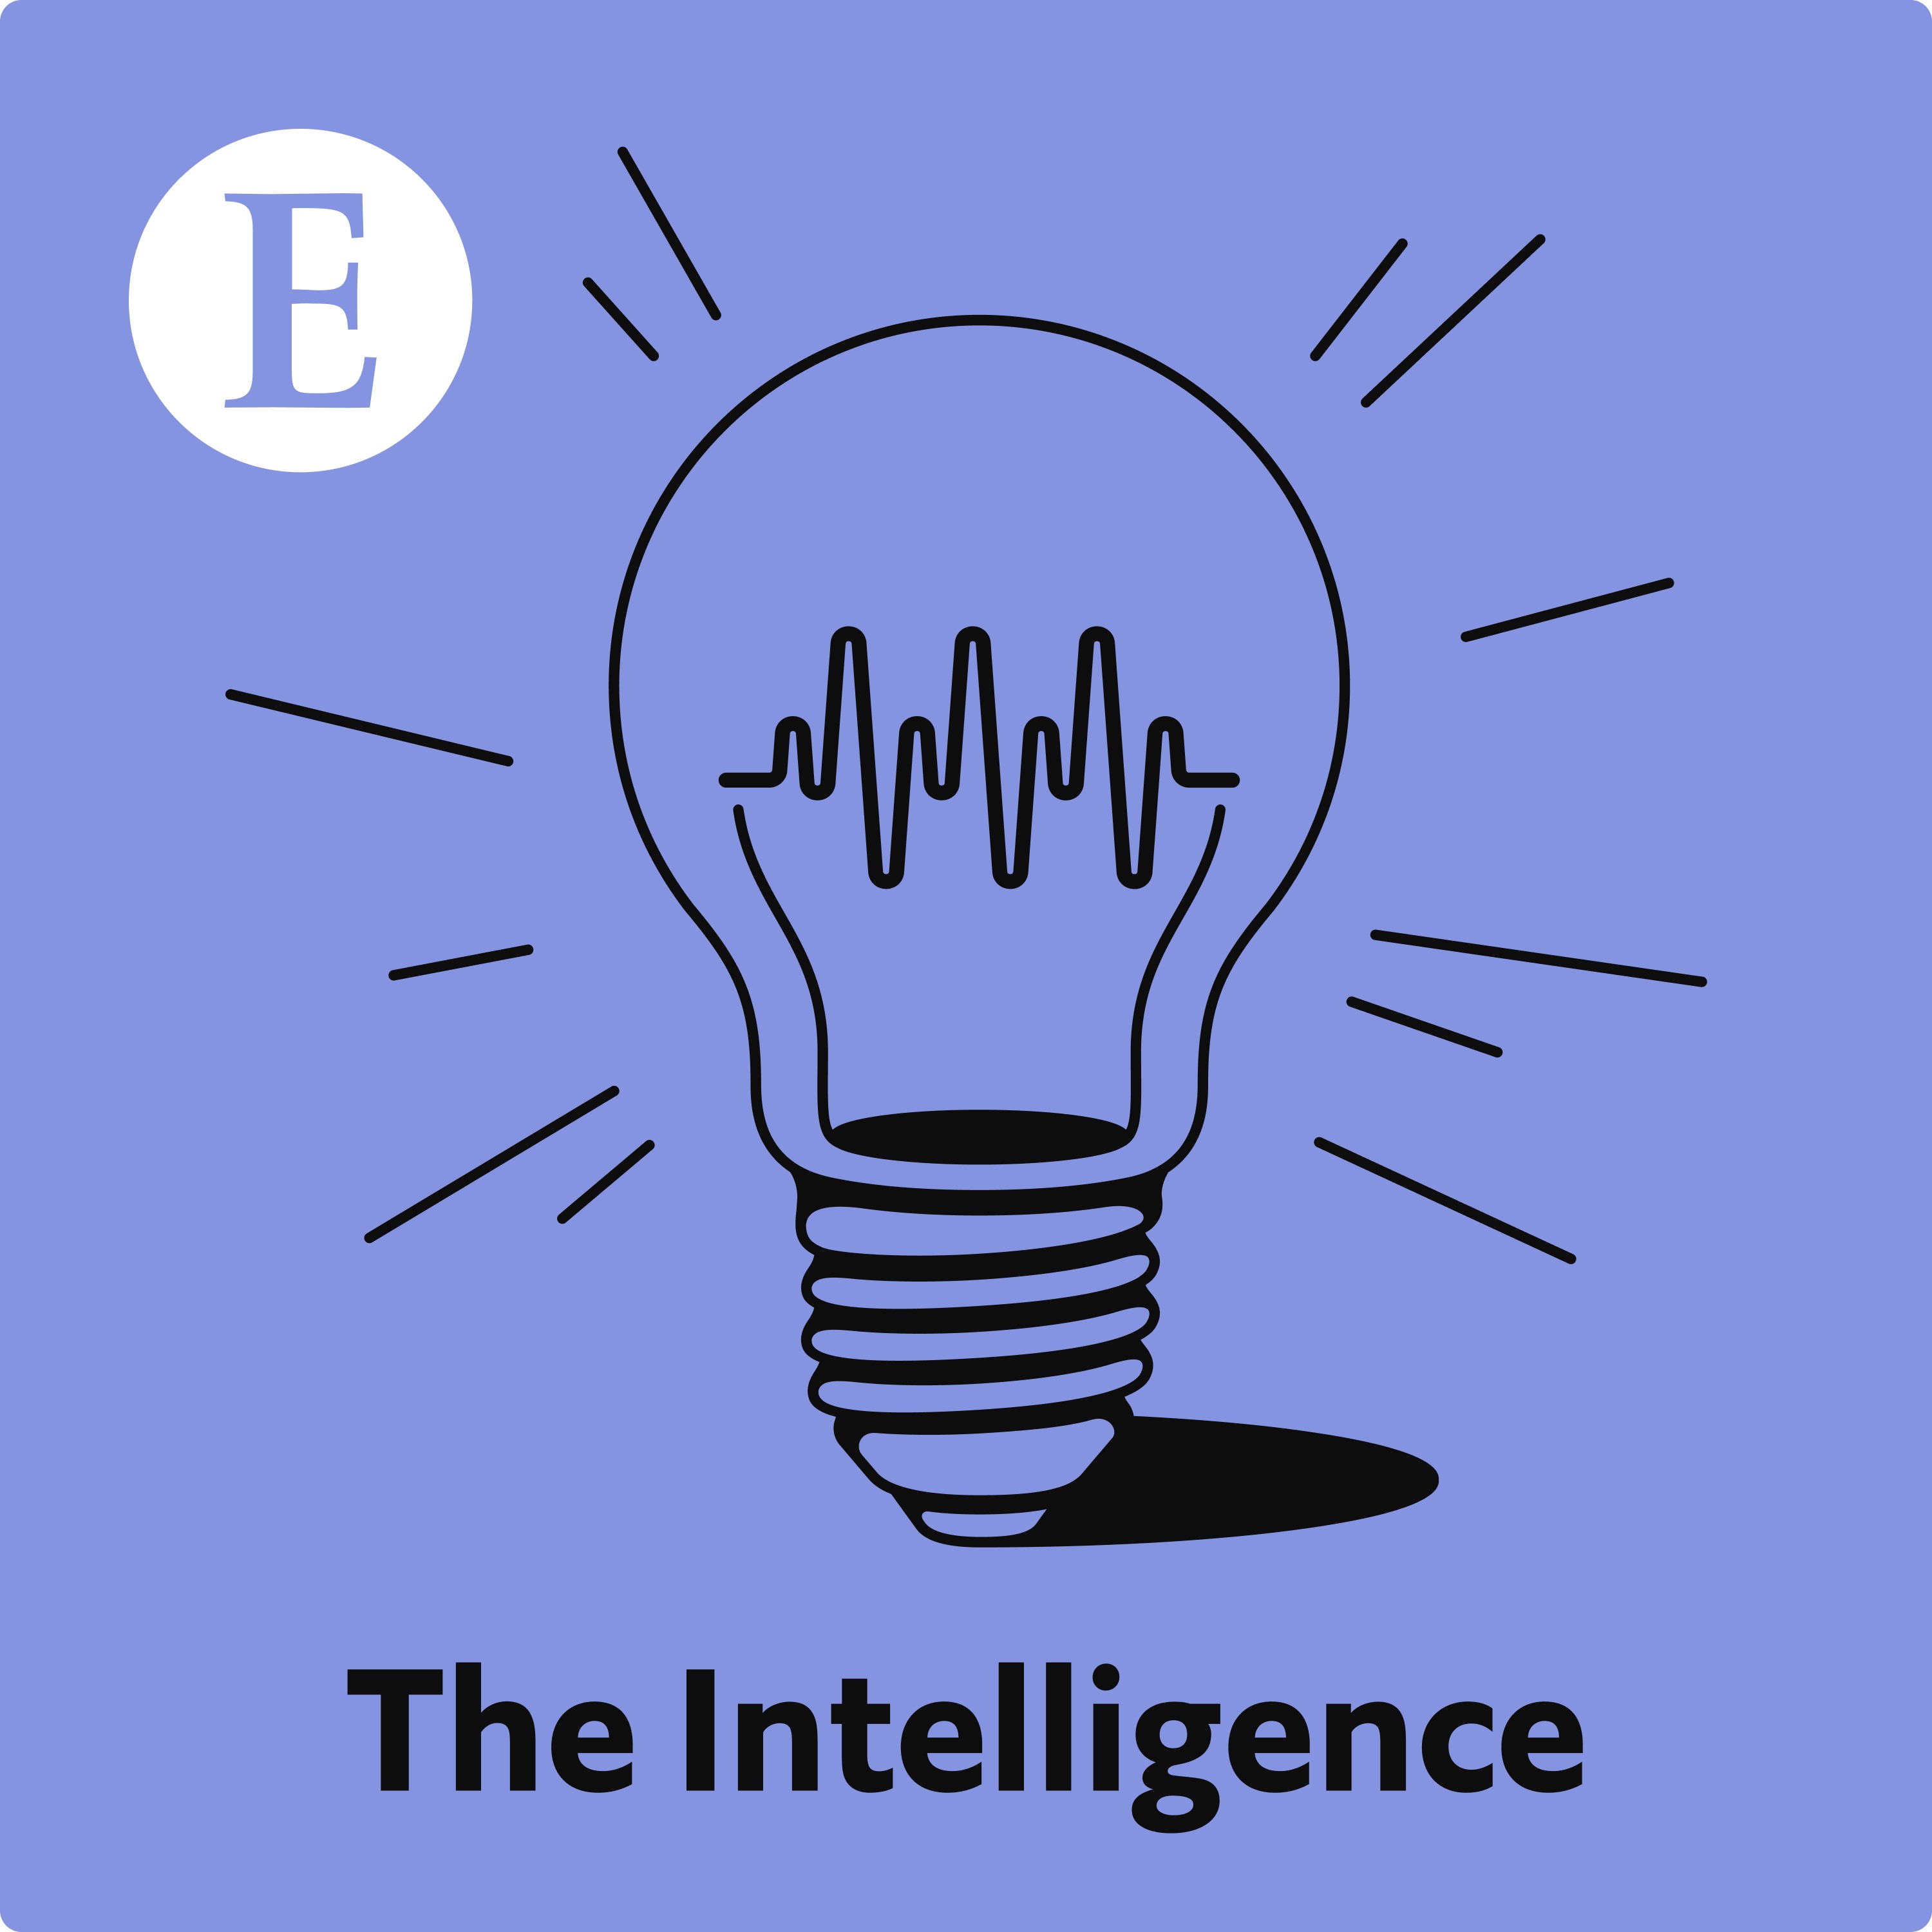 The Intelligence: At a crossroads (really)